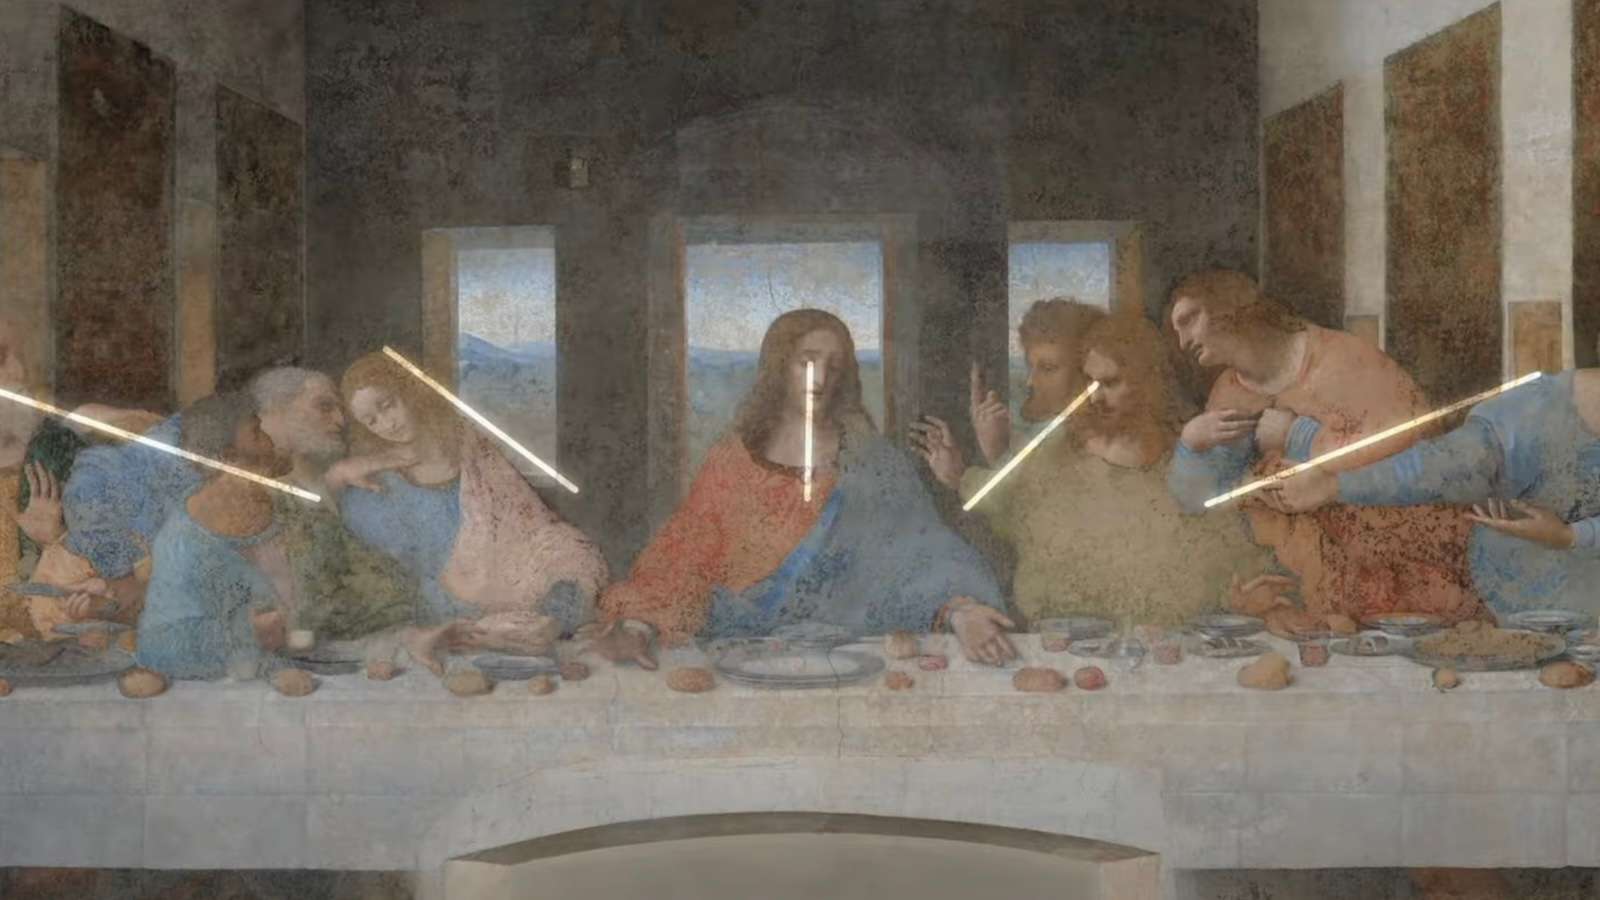 Image of the last supper in Christspiracy